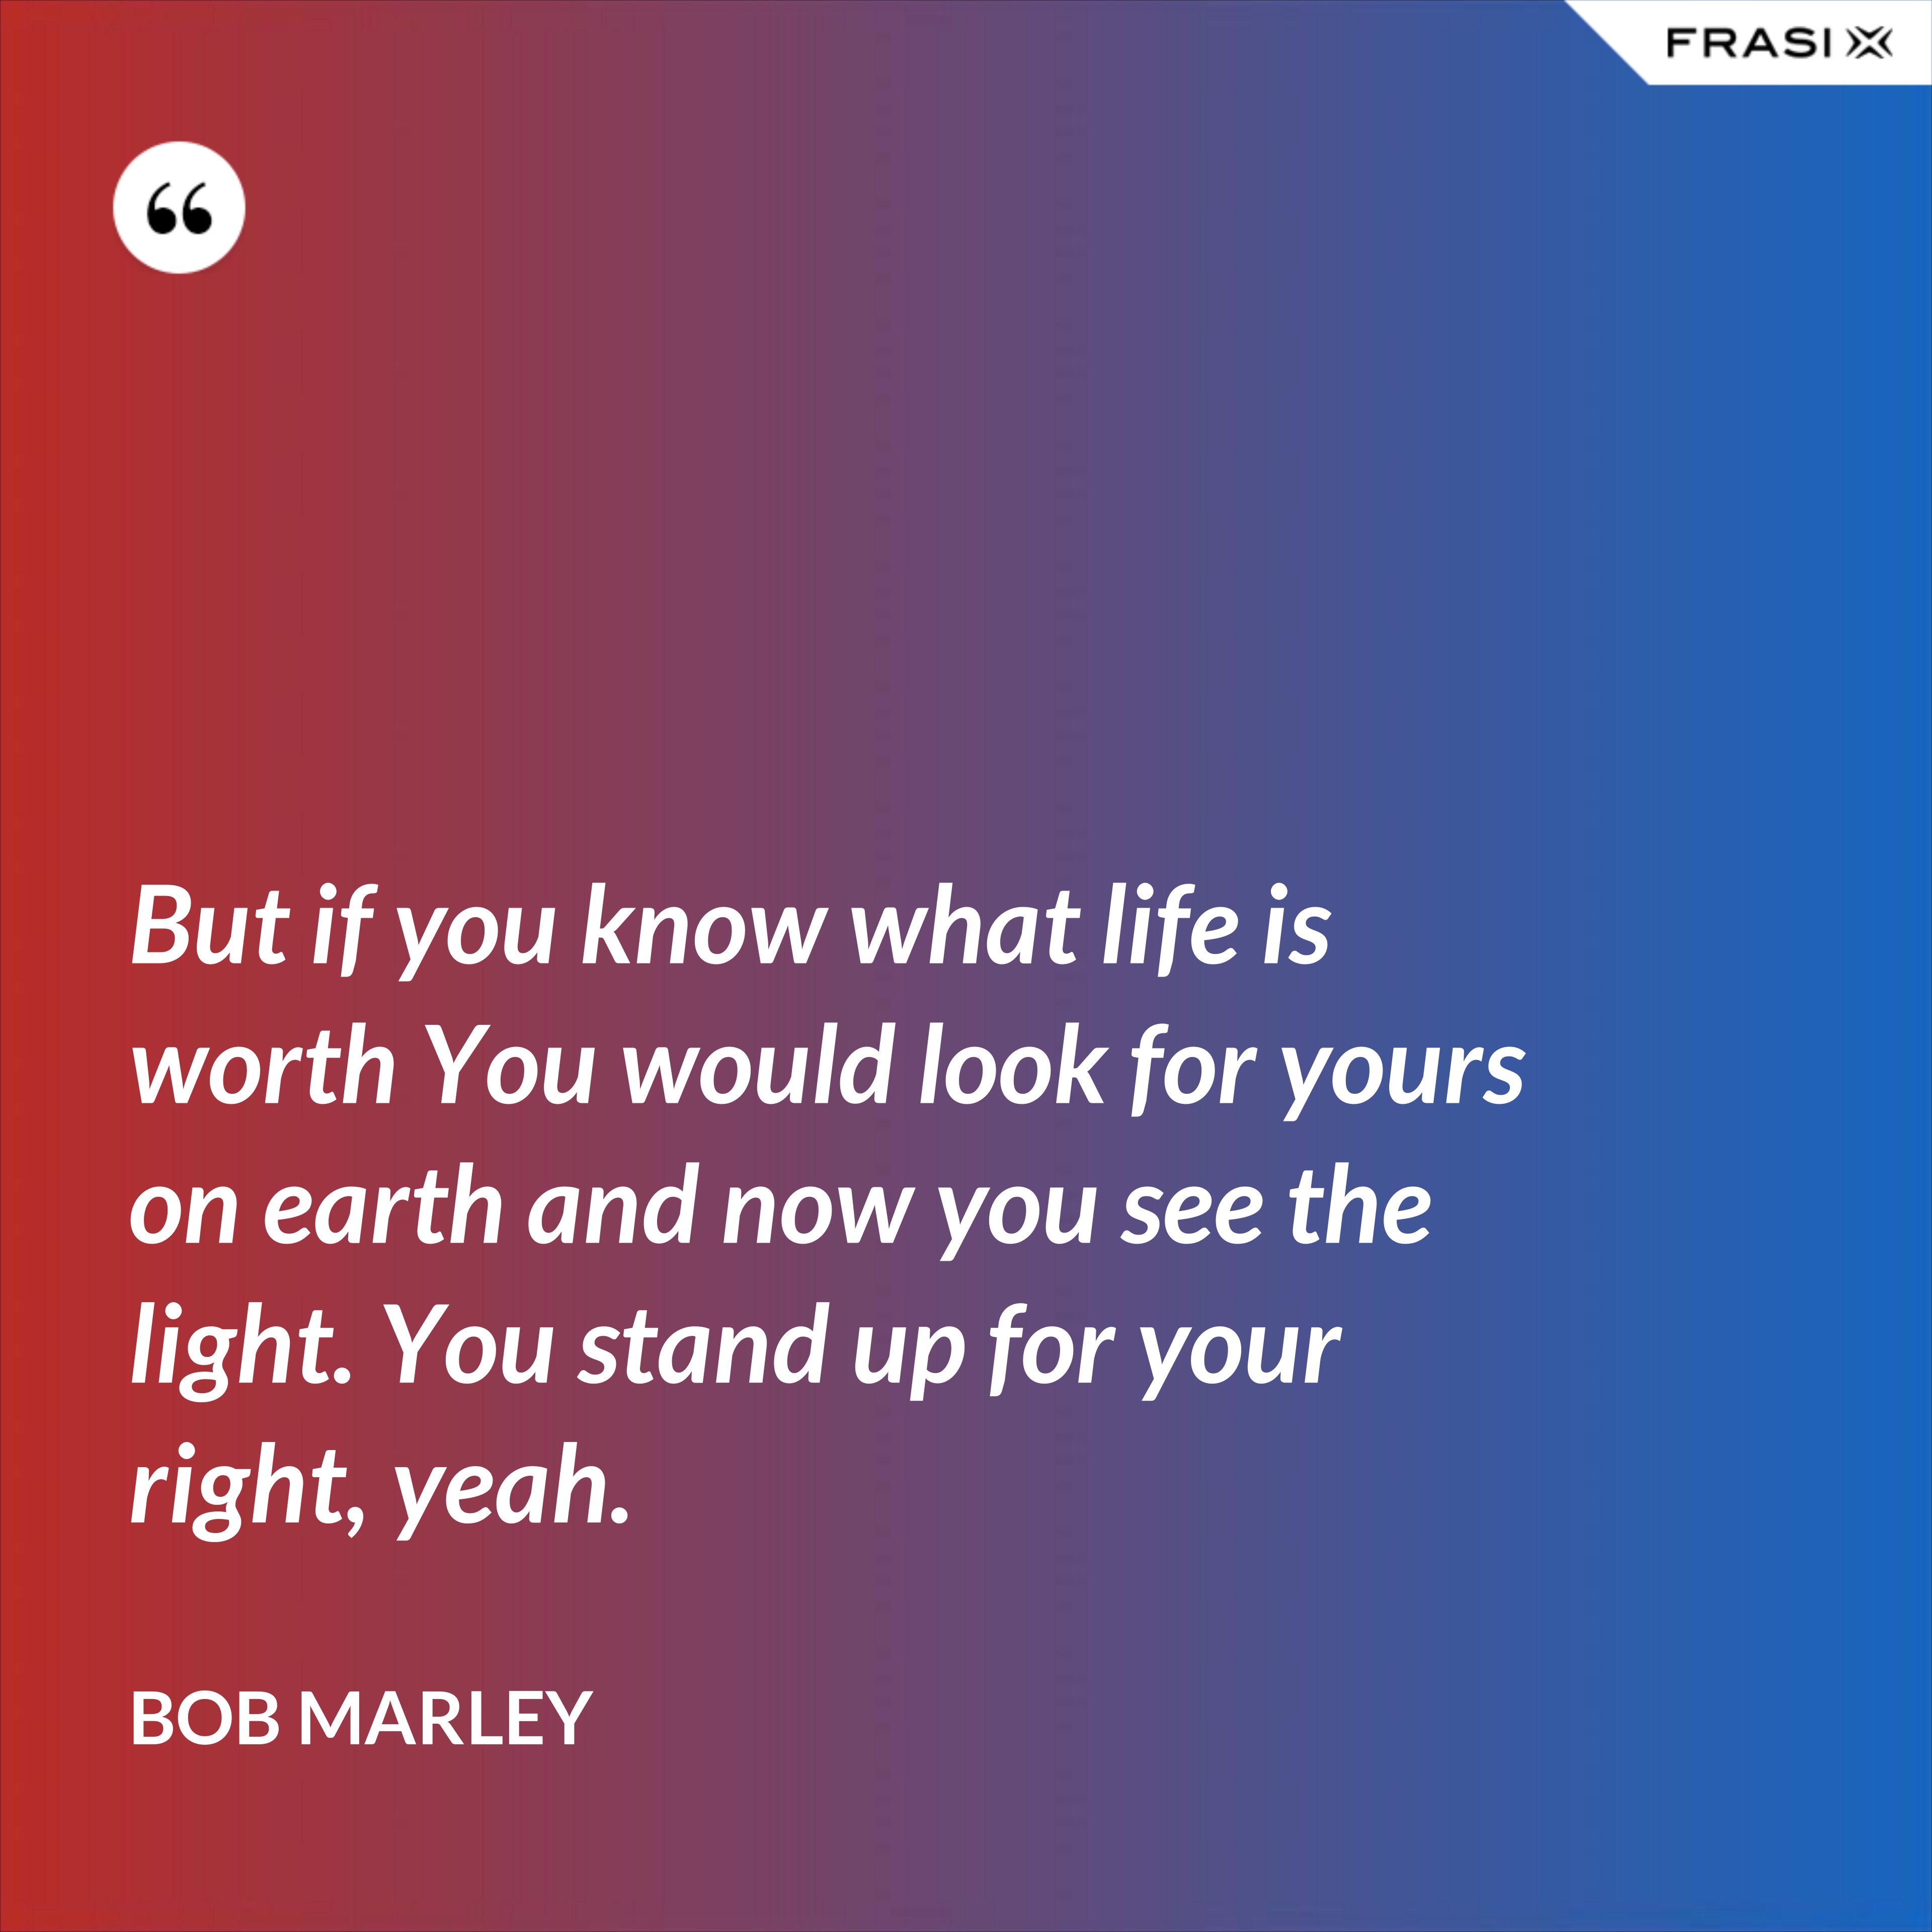 But if you know what life is worth You would look for yours on earth and now you see the light. You stand up for your right, yeah. - Bob Marley